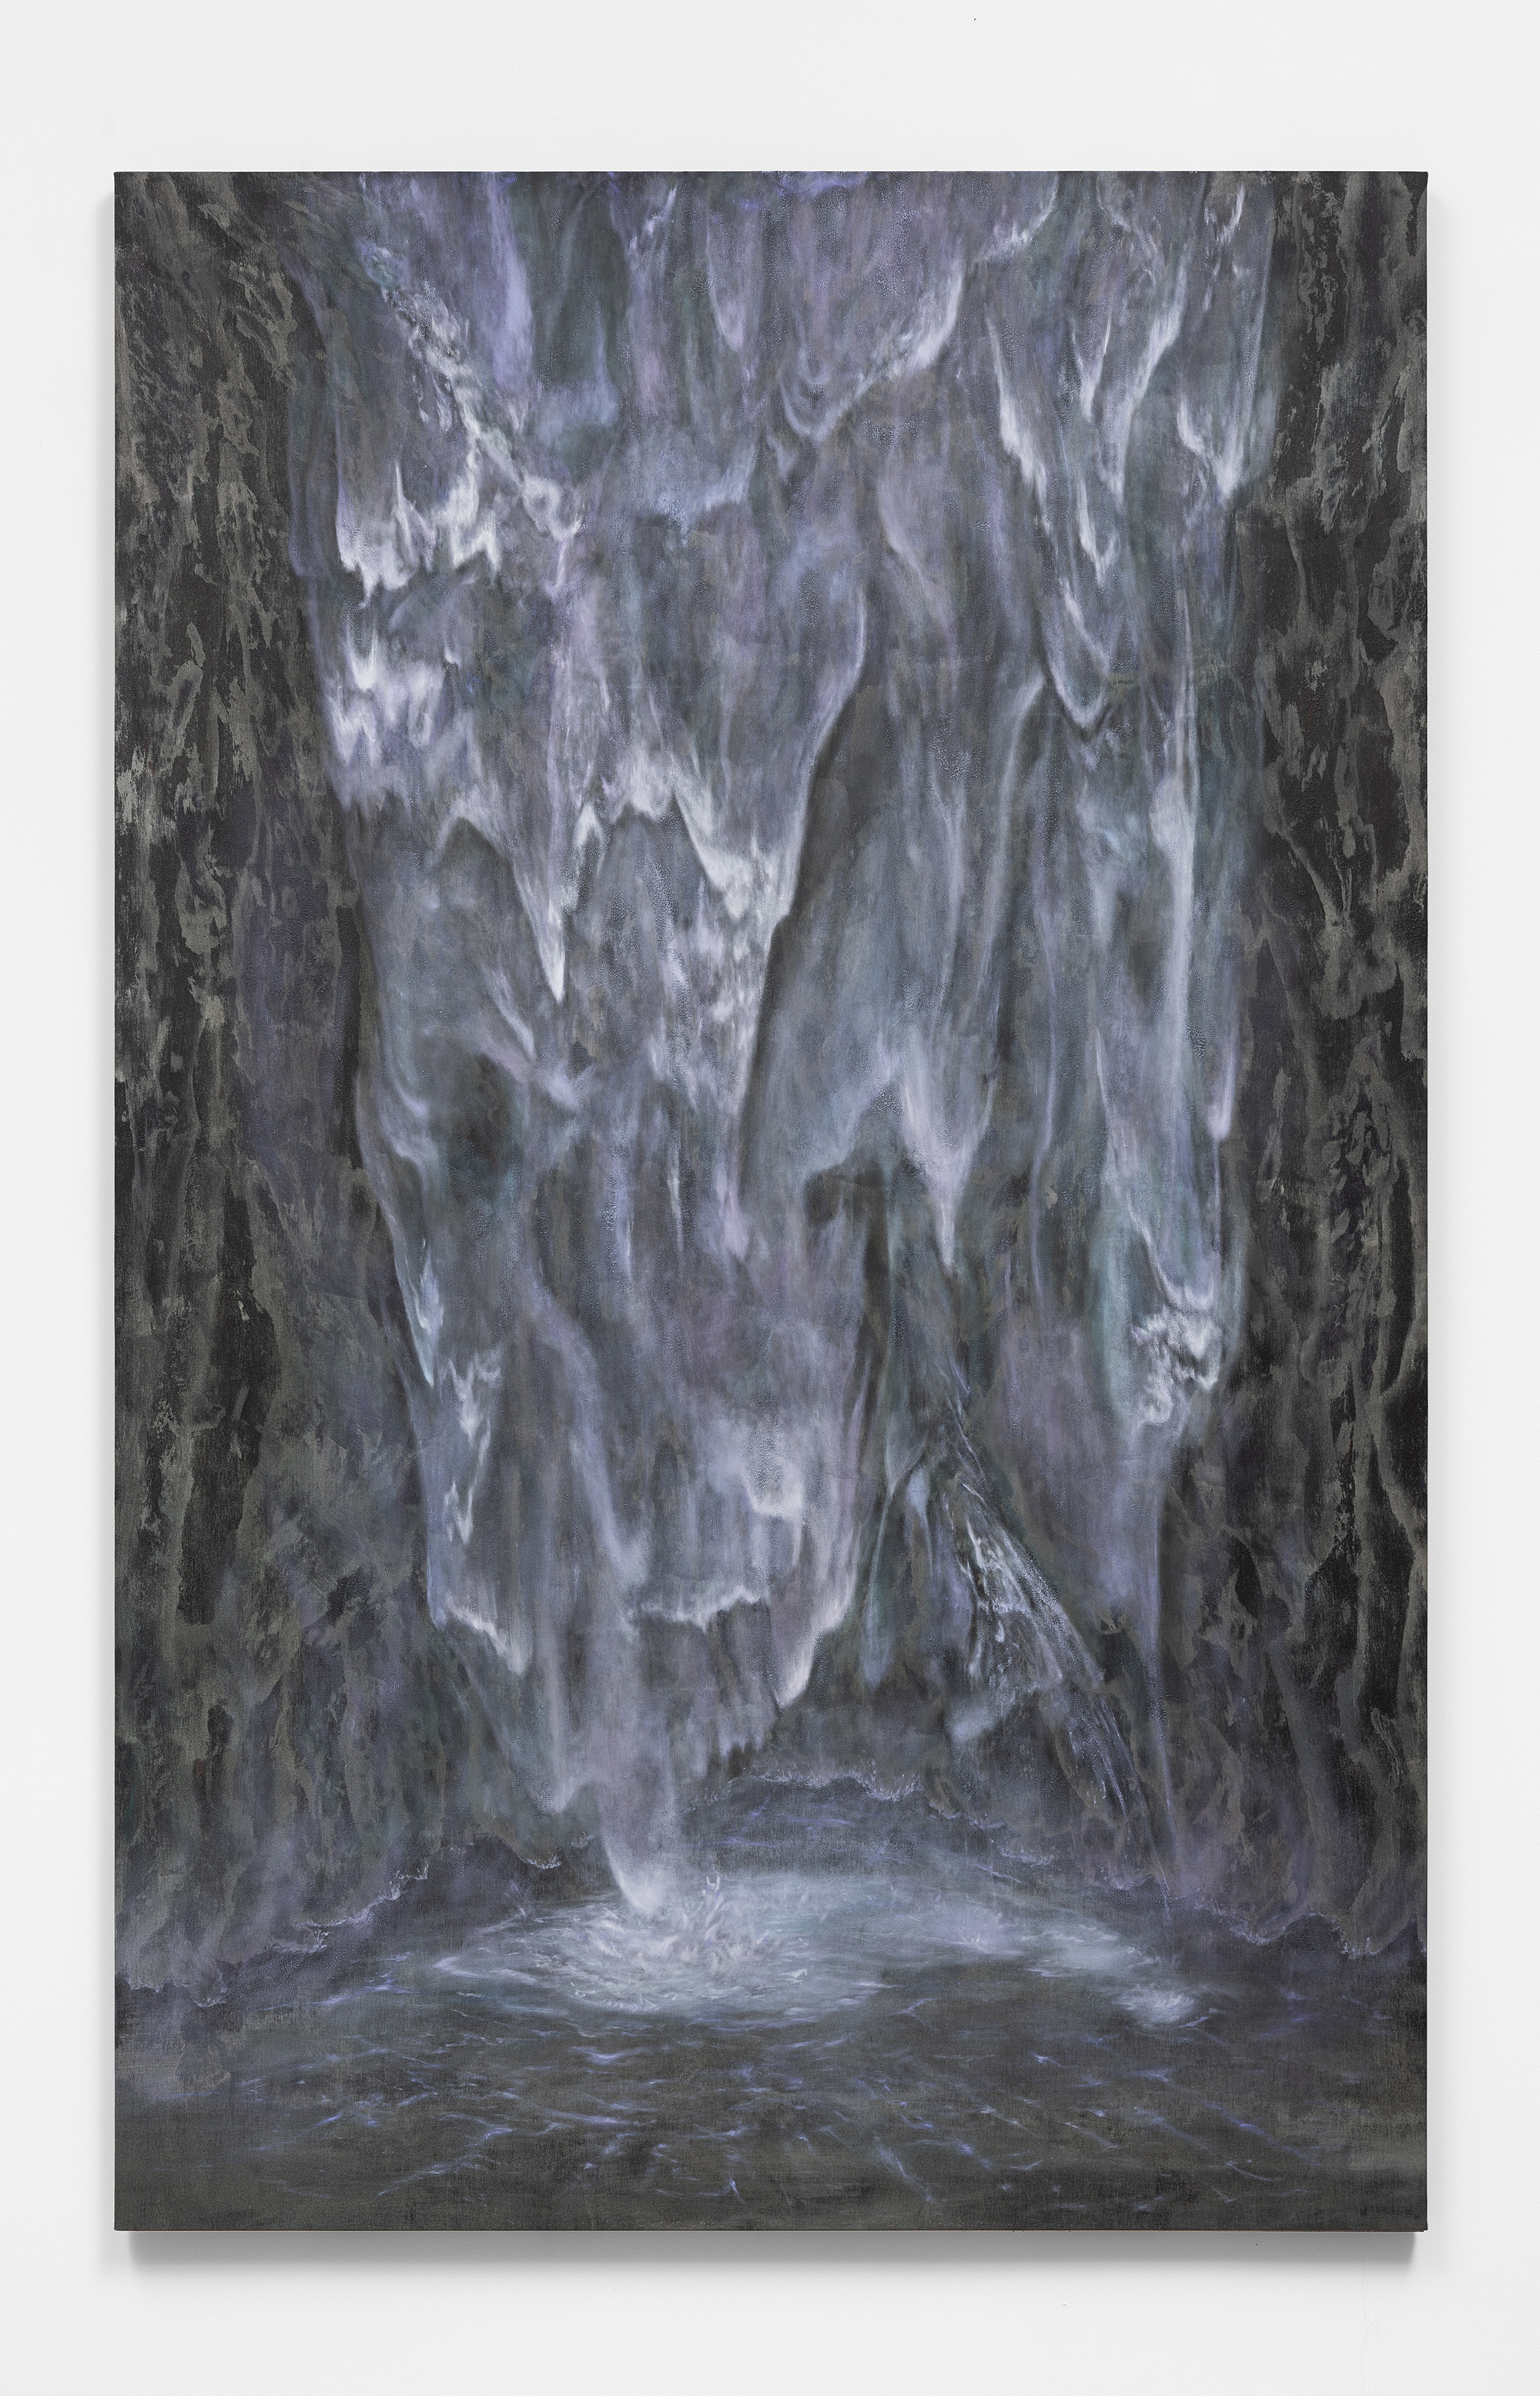 Michael Ho, Almost Heaven, 2023, Oil and acrylic on canvas, 345 x 220 cm, 135 7/8 x 86 5/8 in.